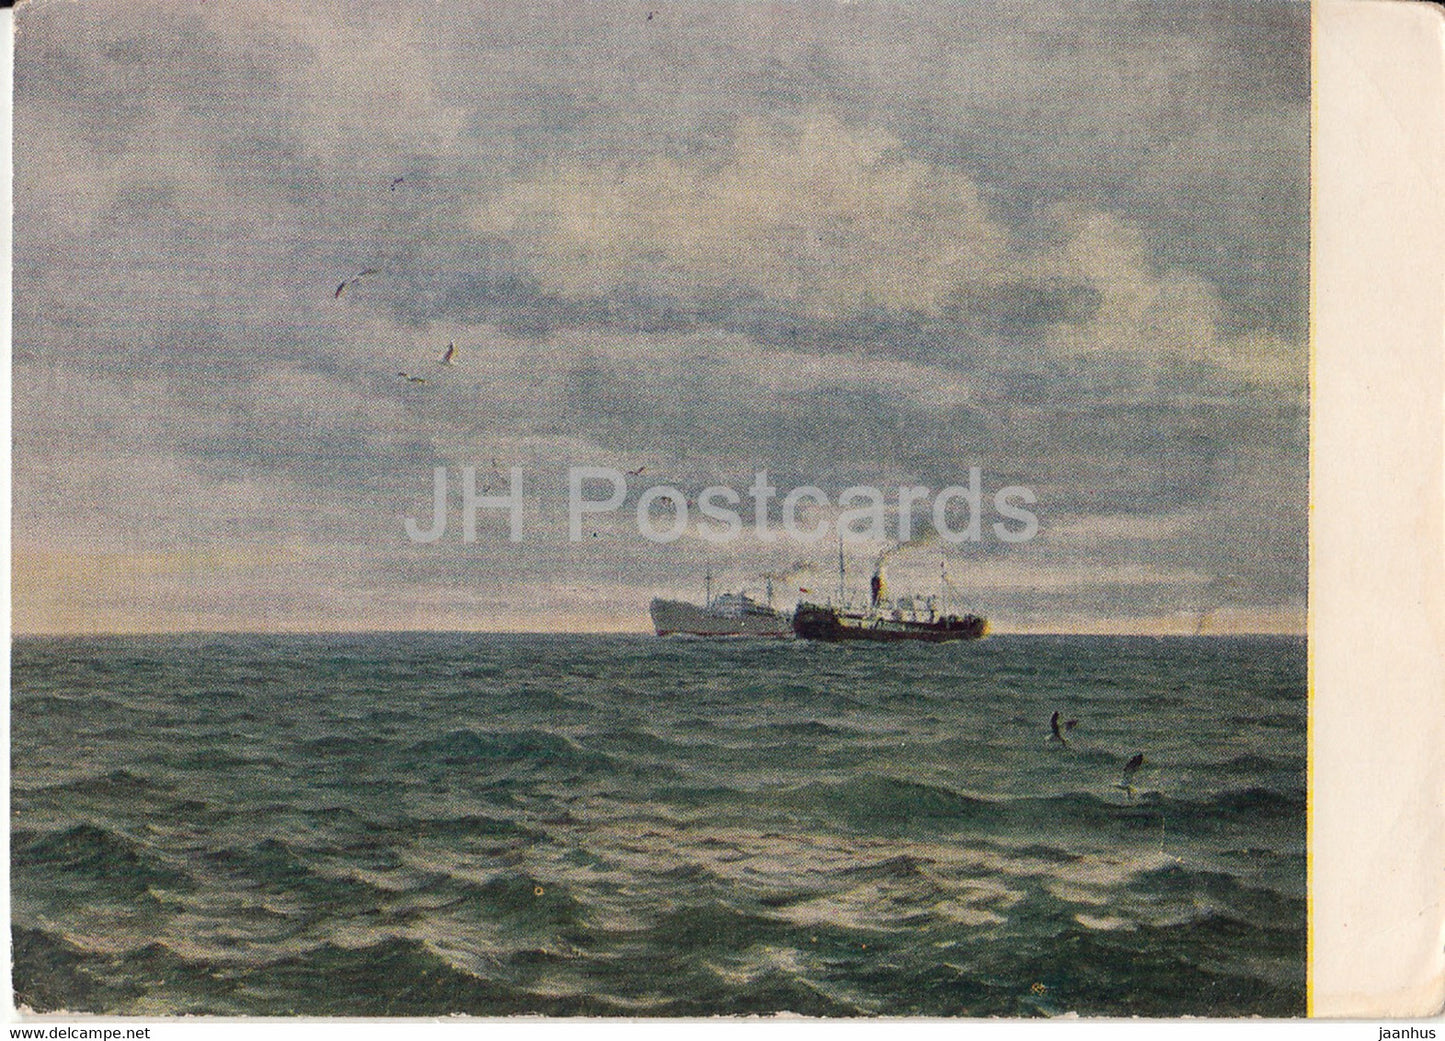 painting by L. Zhigalov - White Sea - ship - Russian art - 1956 - Russia USSR - unused - JH Postcards